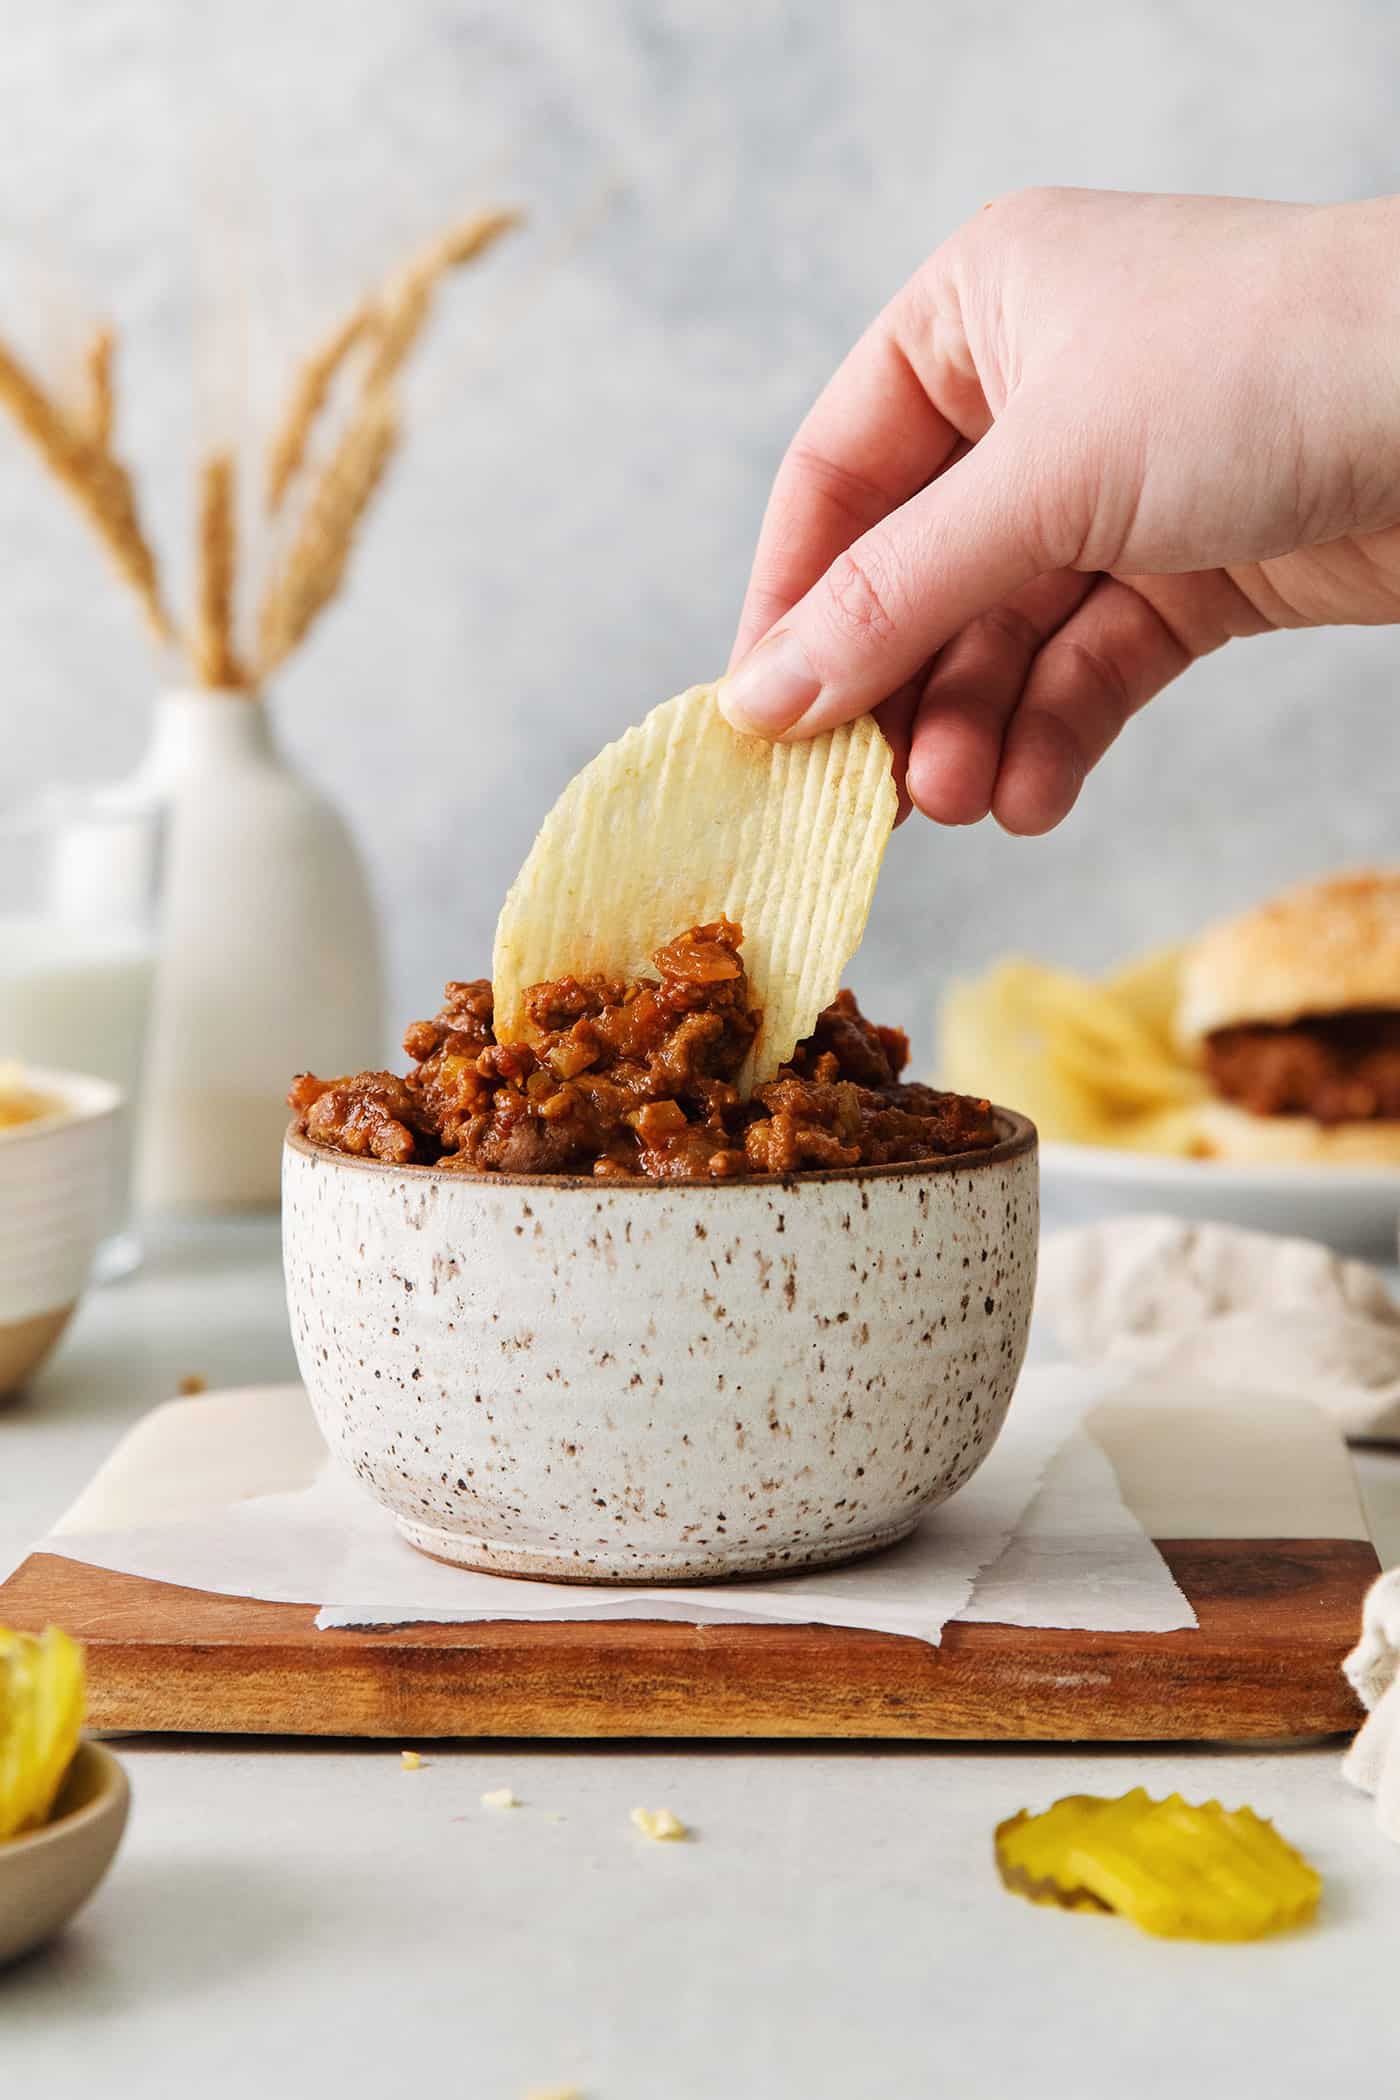 A hand dipping a chip in sloppy joe meat